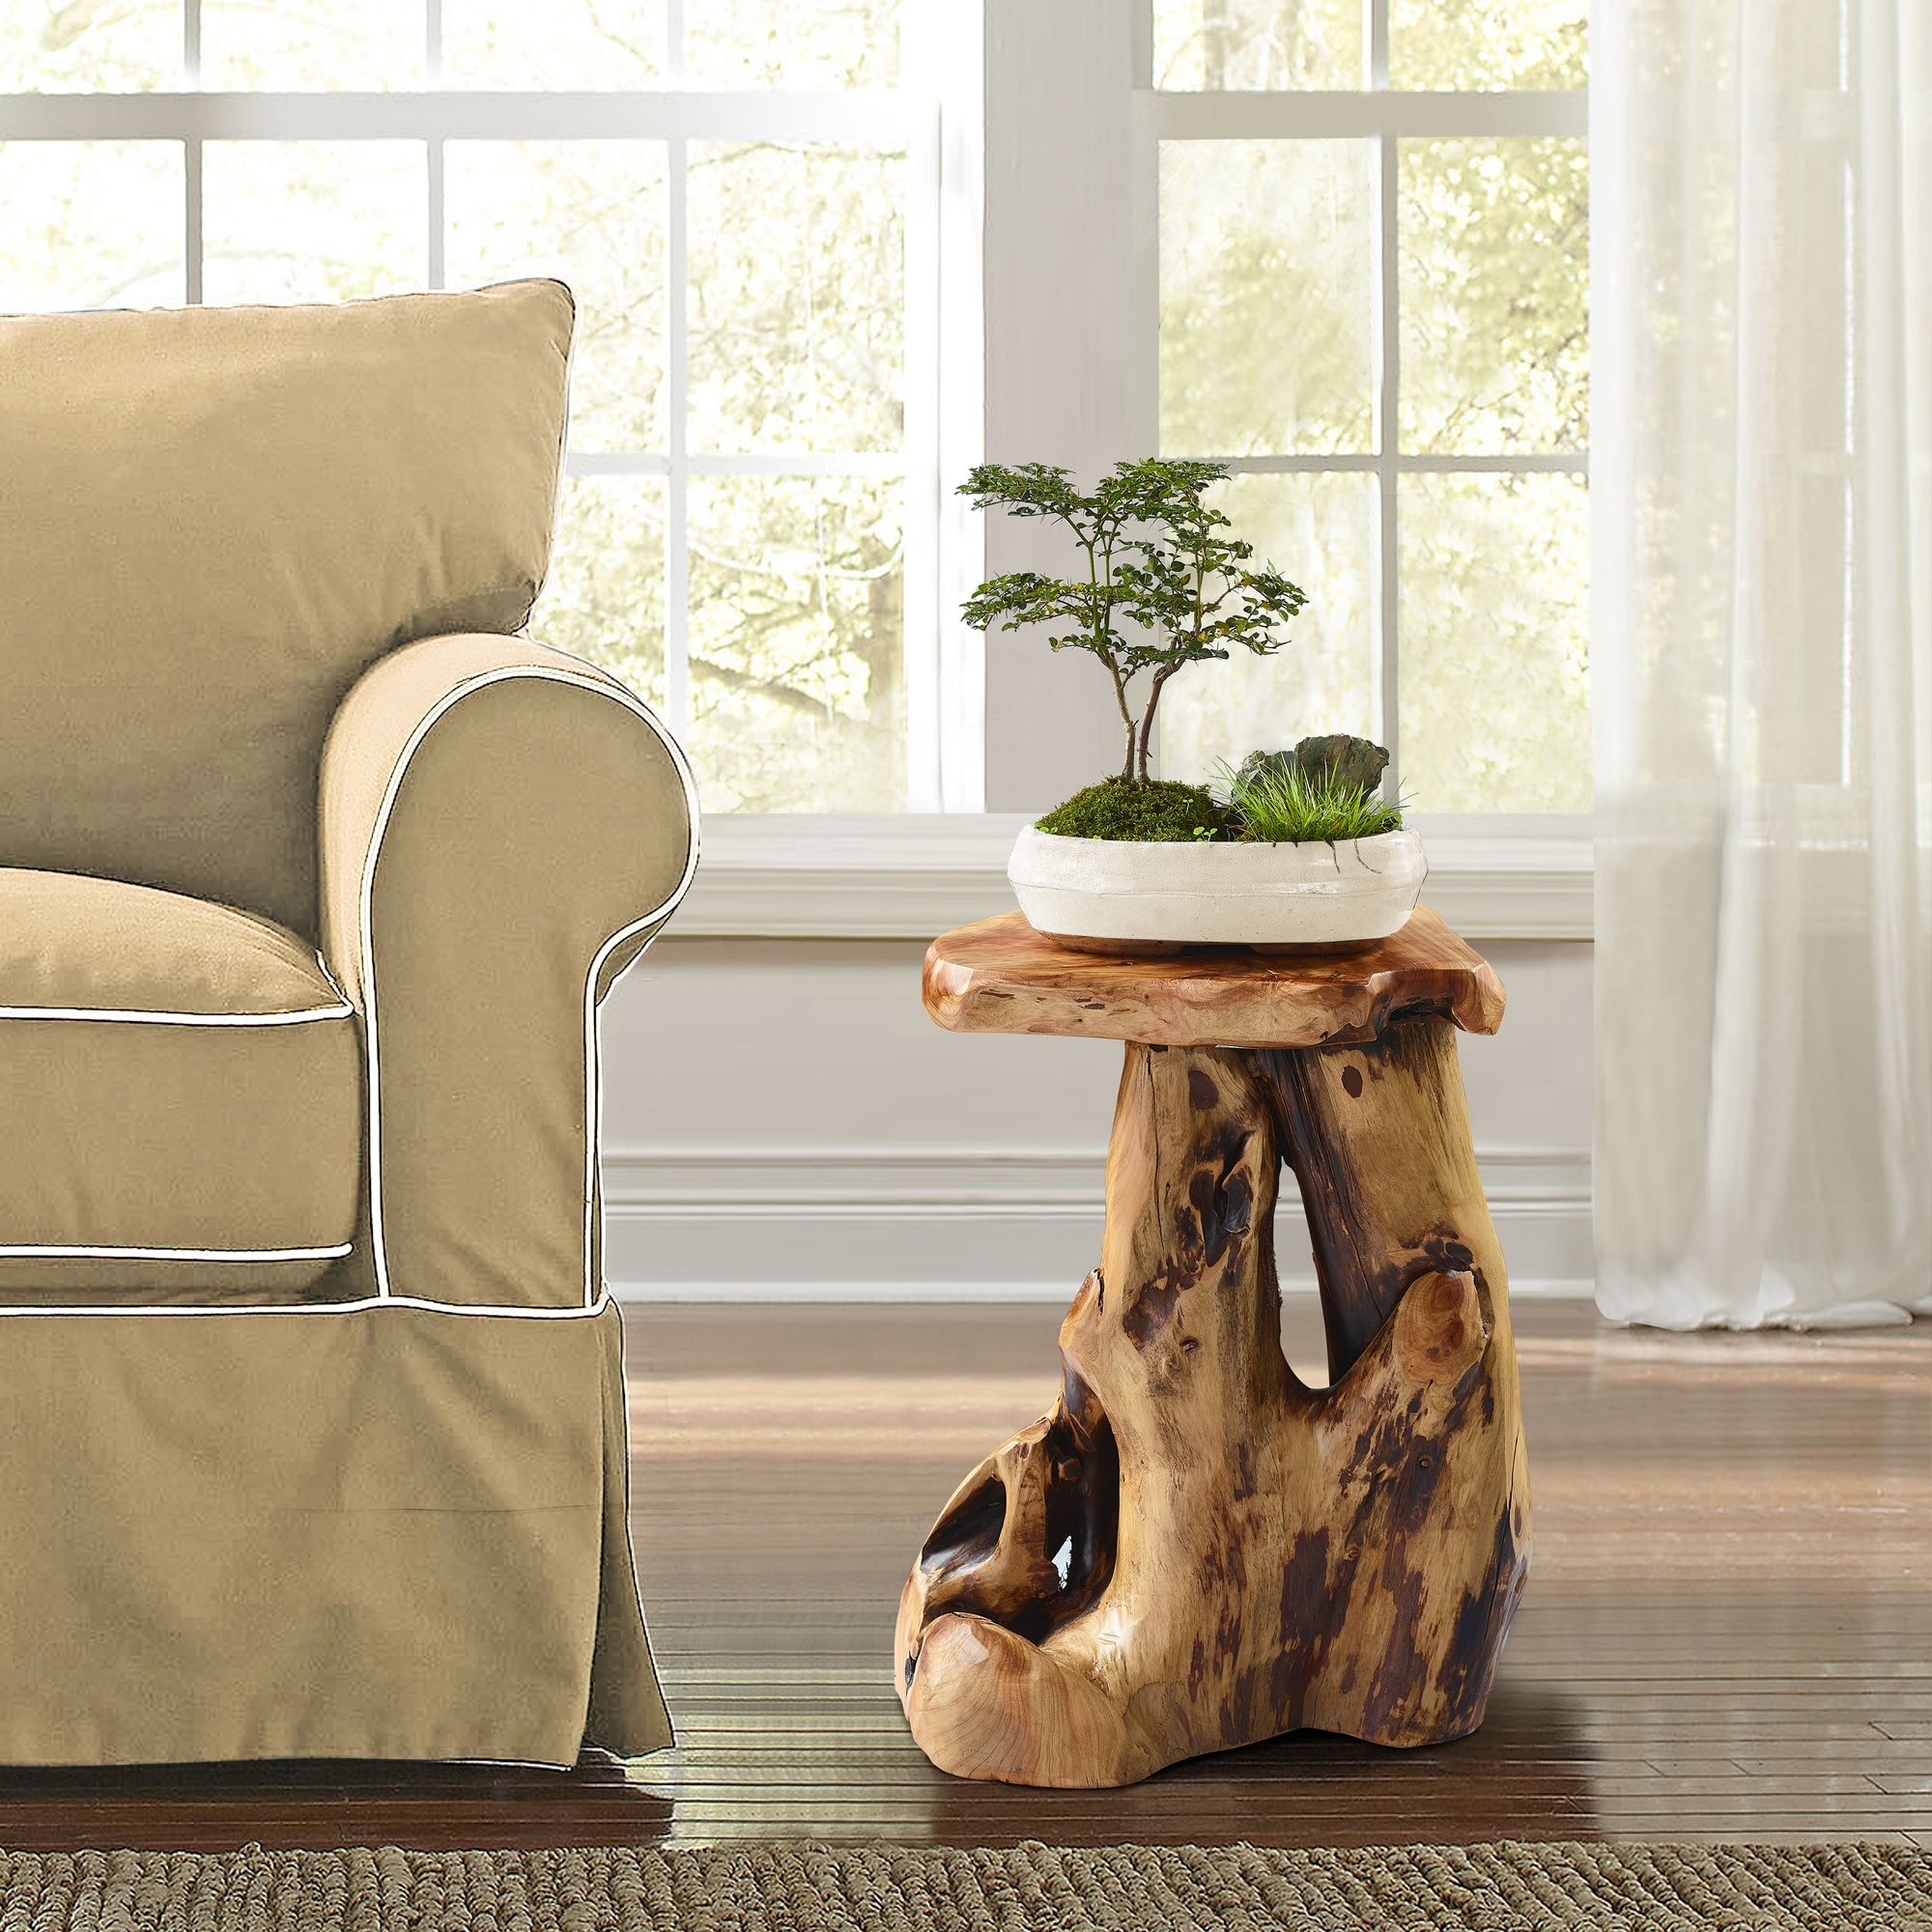 Greenage Cedar Roots Natural Flower Stand Reclaimed Woods End Table%2C 13.5%22 x 15.5%22 x 19.5%22 Height